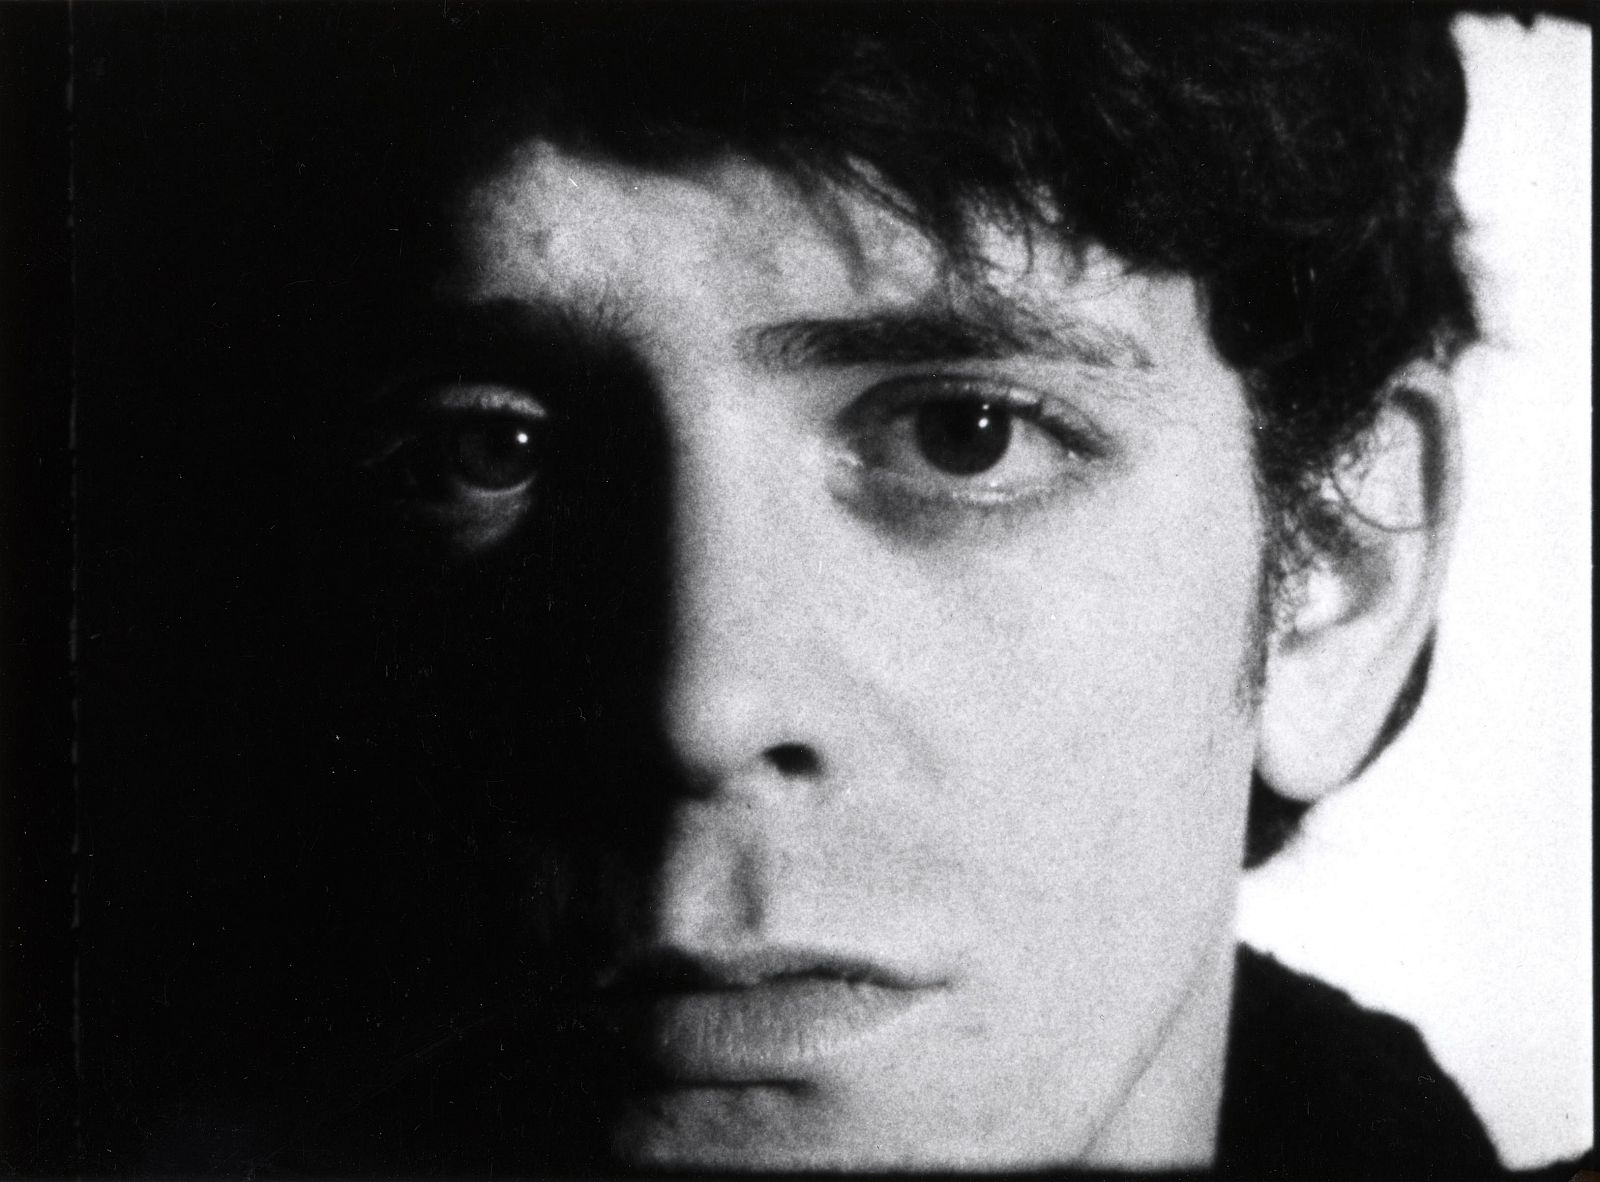 Andy Warhol. Screen Test: Lou Reed (1966). 16mm film (black and white, silent). 4 min. at 16fps @ 2010 The Andy Warhol Museum, Pittsburgh, PA, a museum of Carnegie Institute. All rights reserved. Film still courtesy of The Andy Warhol Museum.@ 2010 The Andy Warhol Museum, Pittsburgh, PA